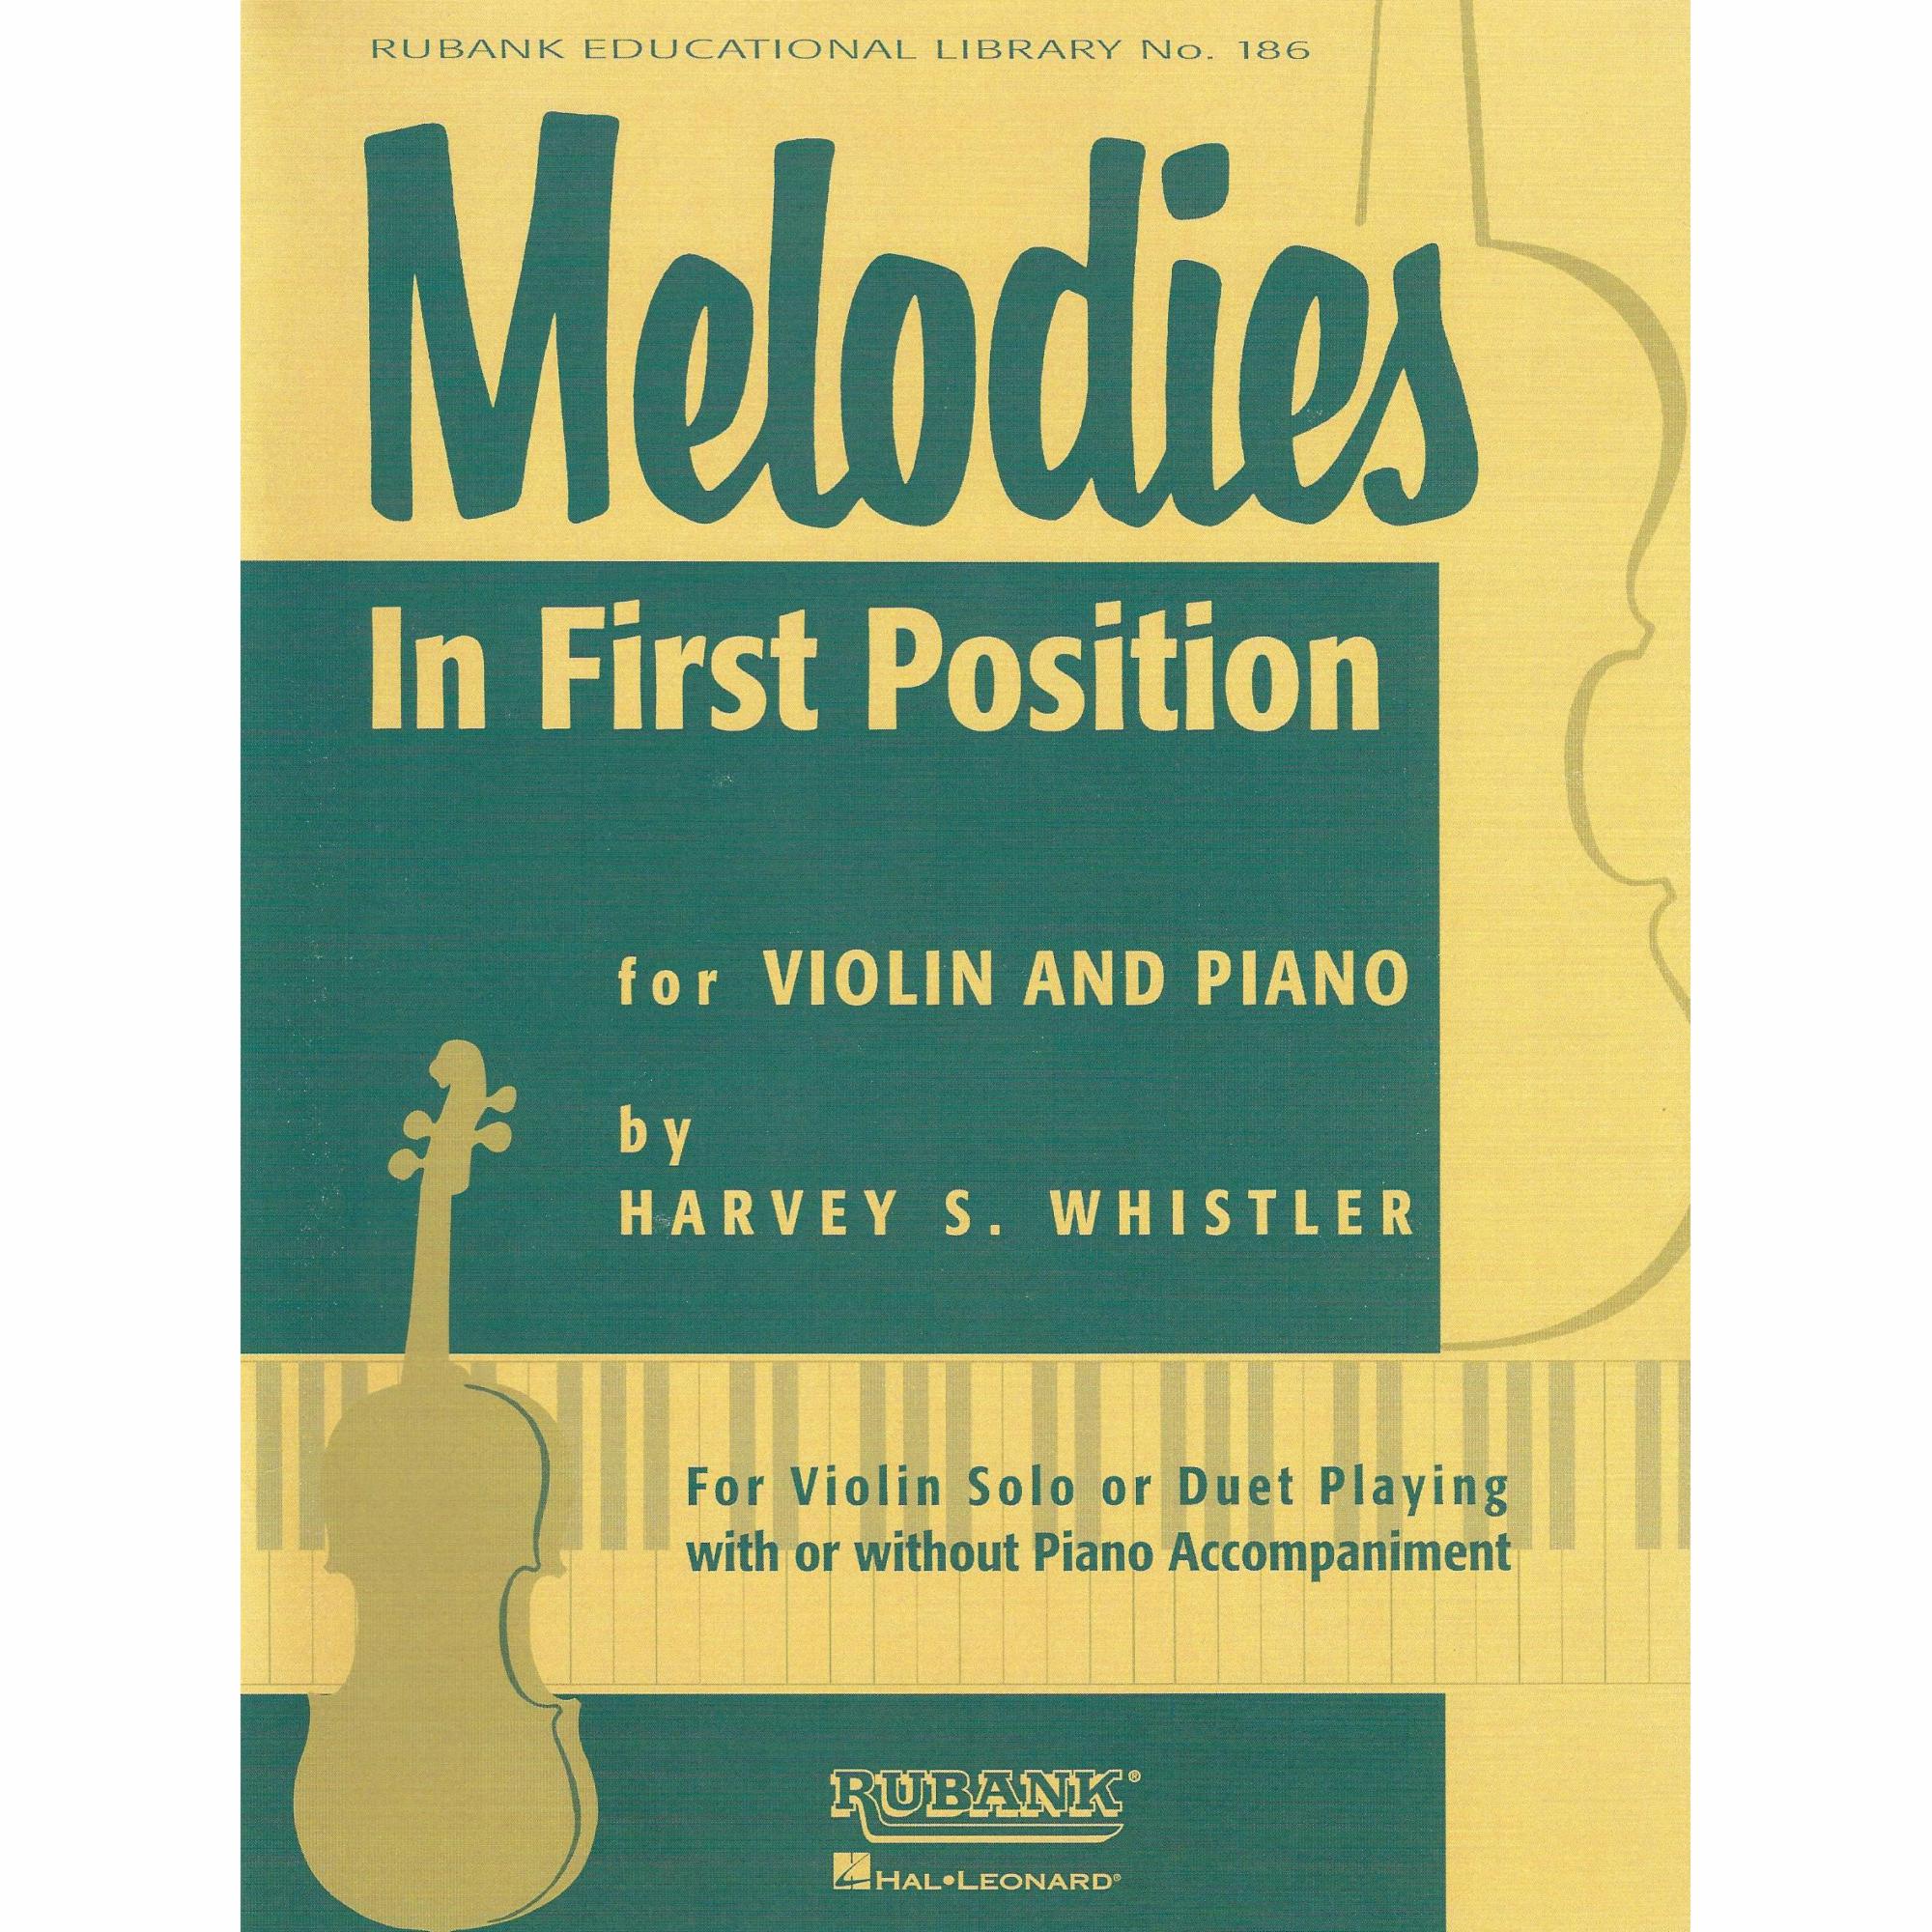 Melodies in First Position for Violin and Piano